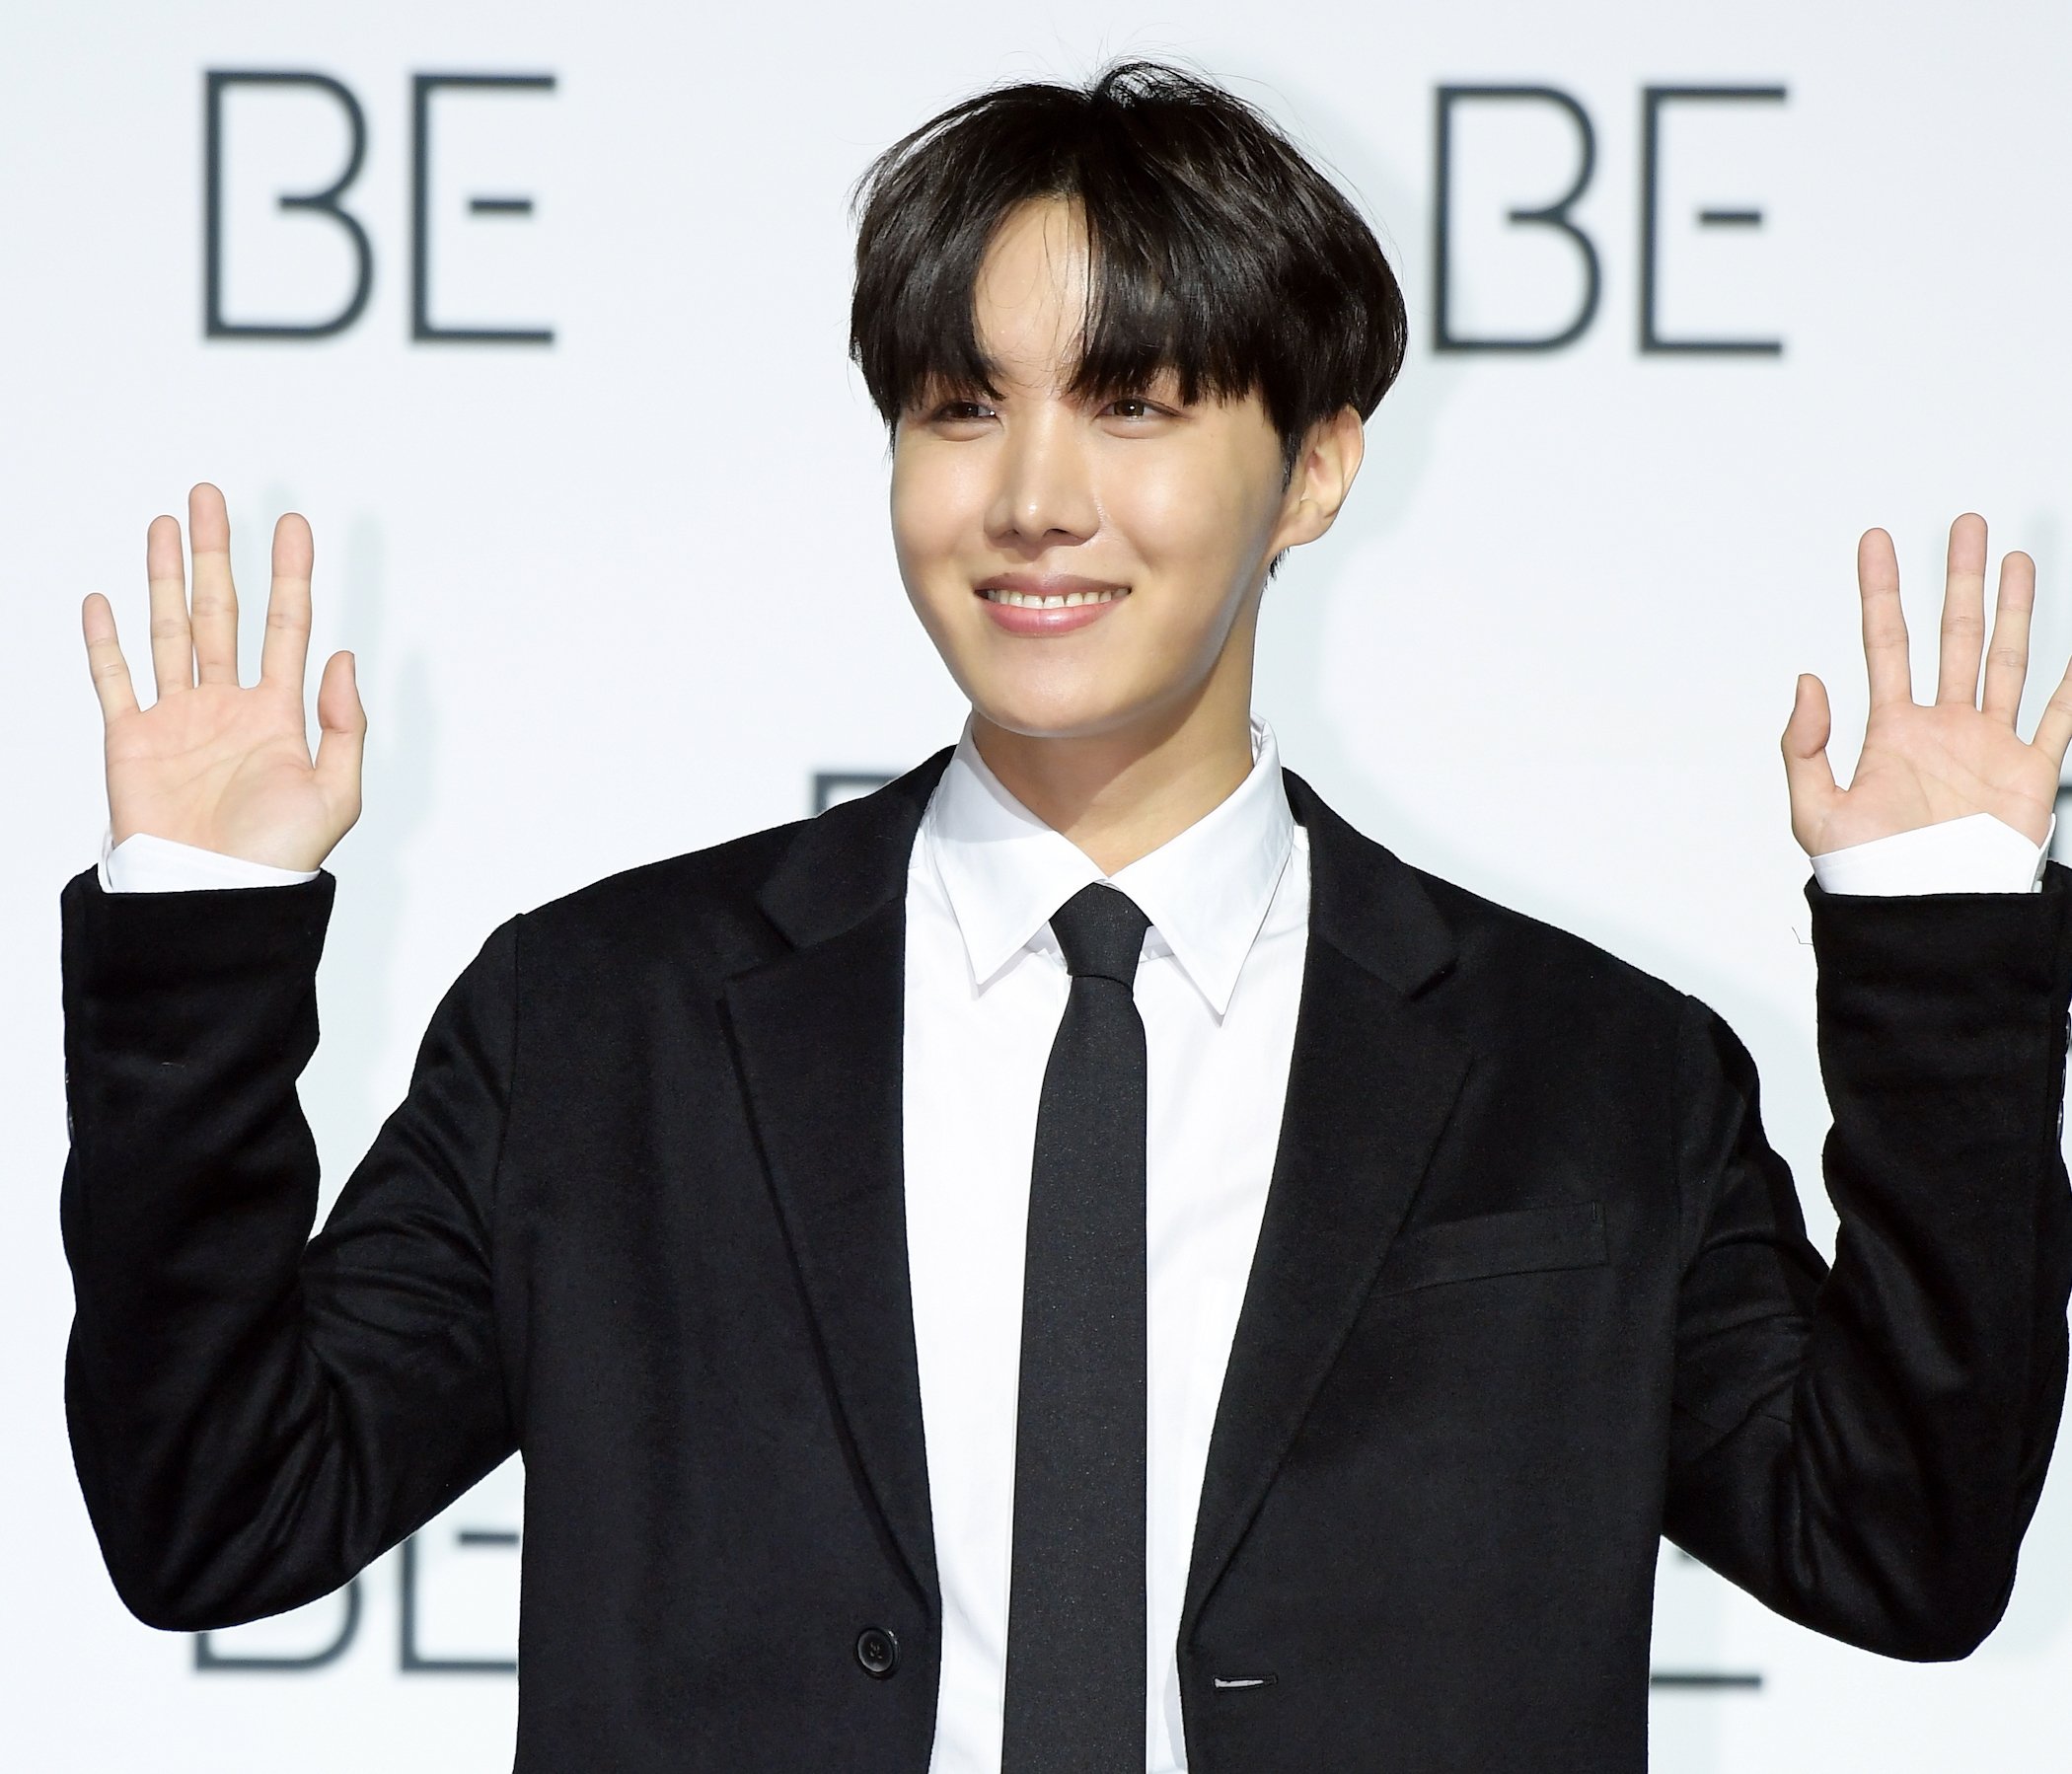 What are some of the best outfits worn by BTS J-Hope? - Quora